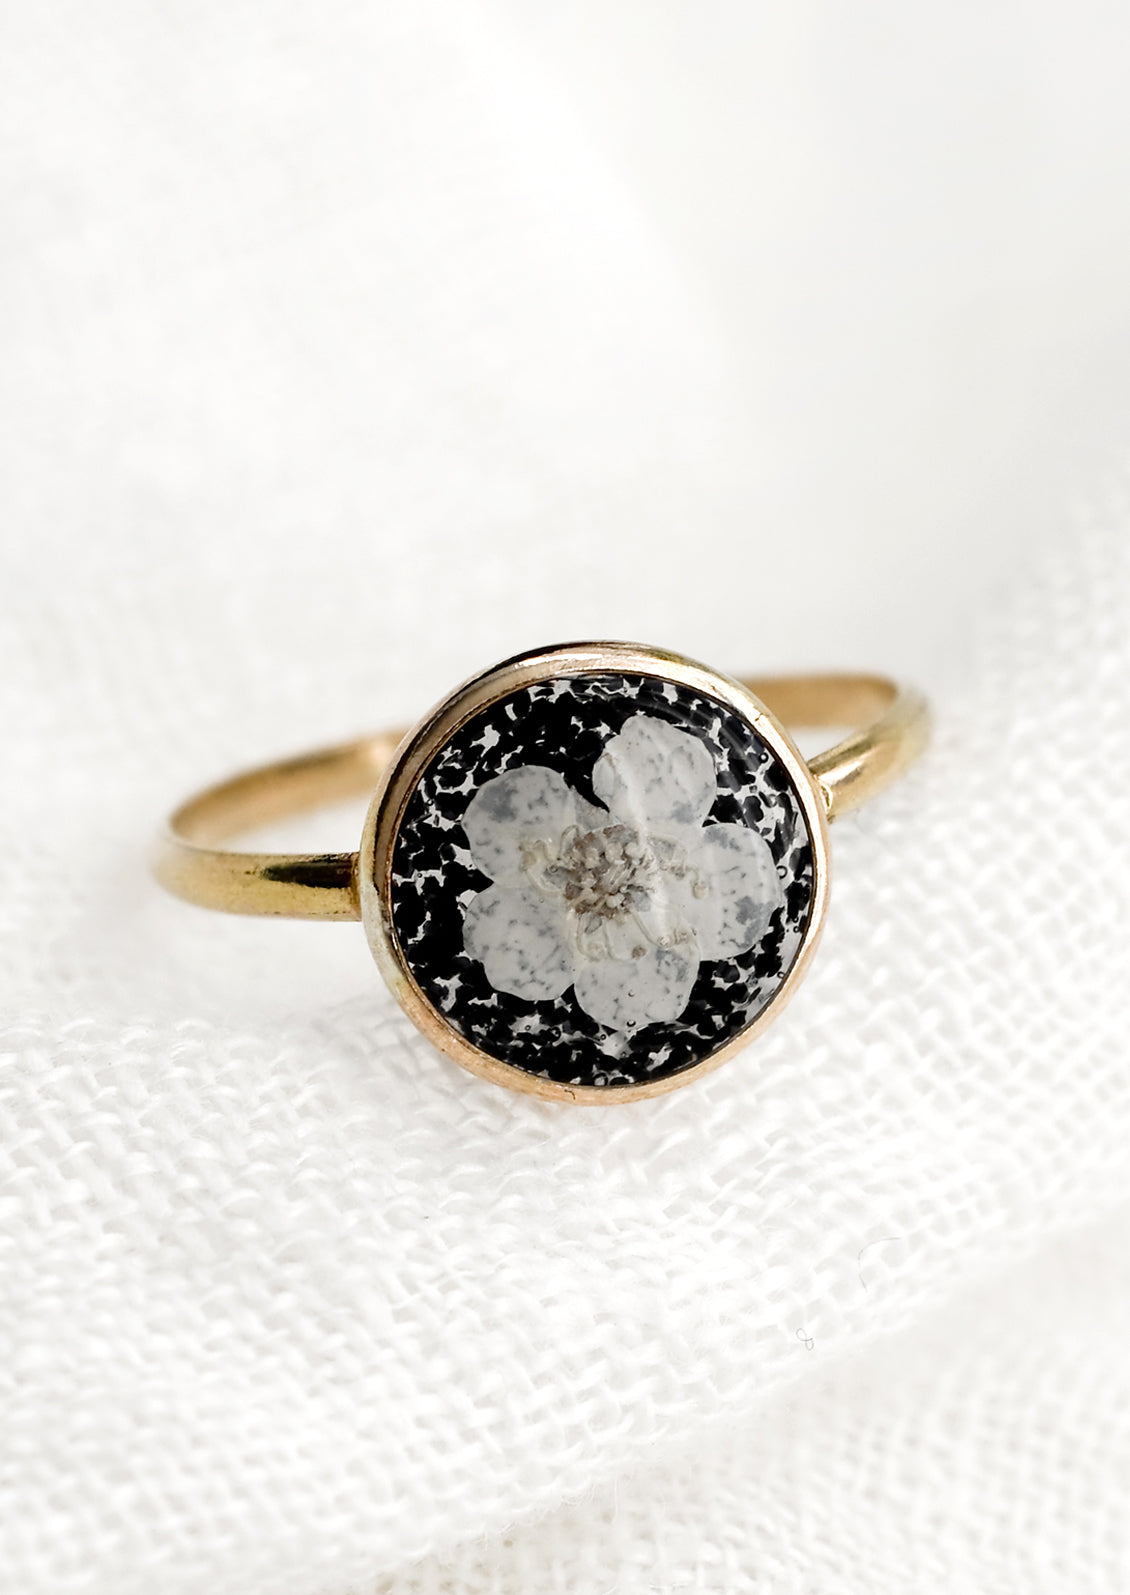 A gold round bezel ring showing white flower on black background.